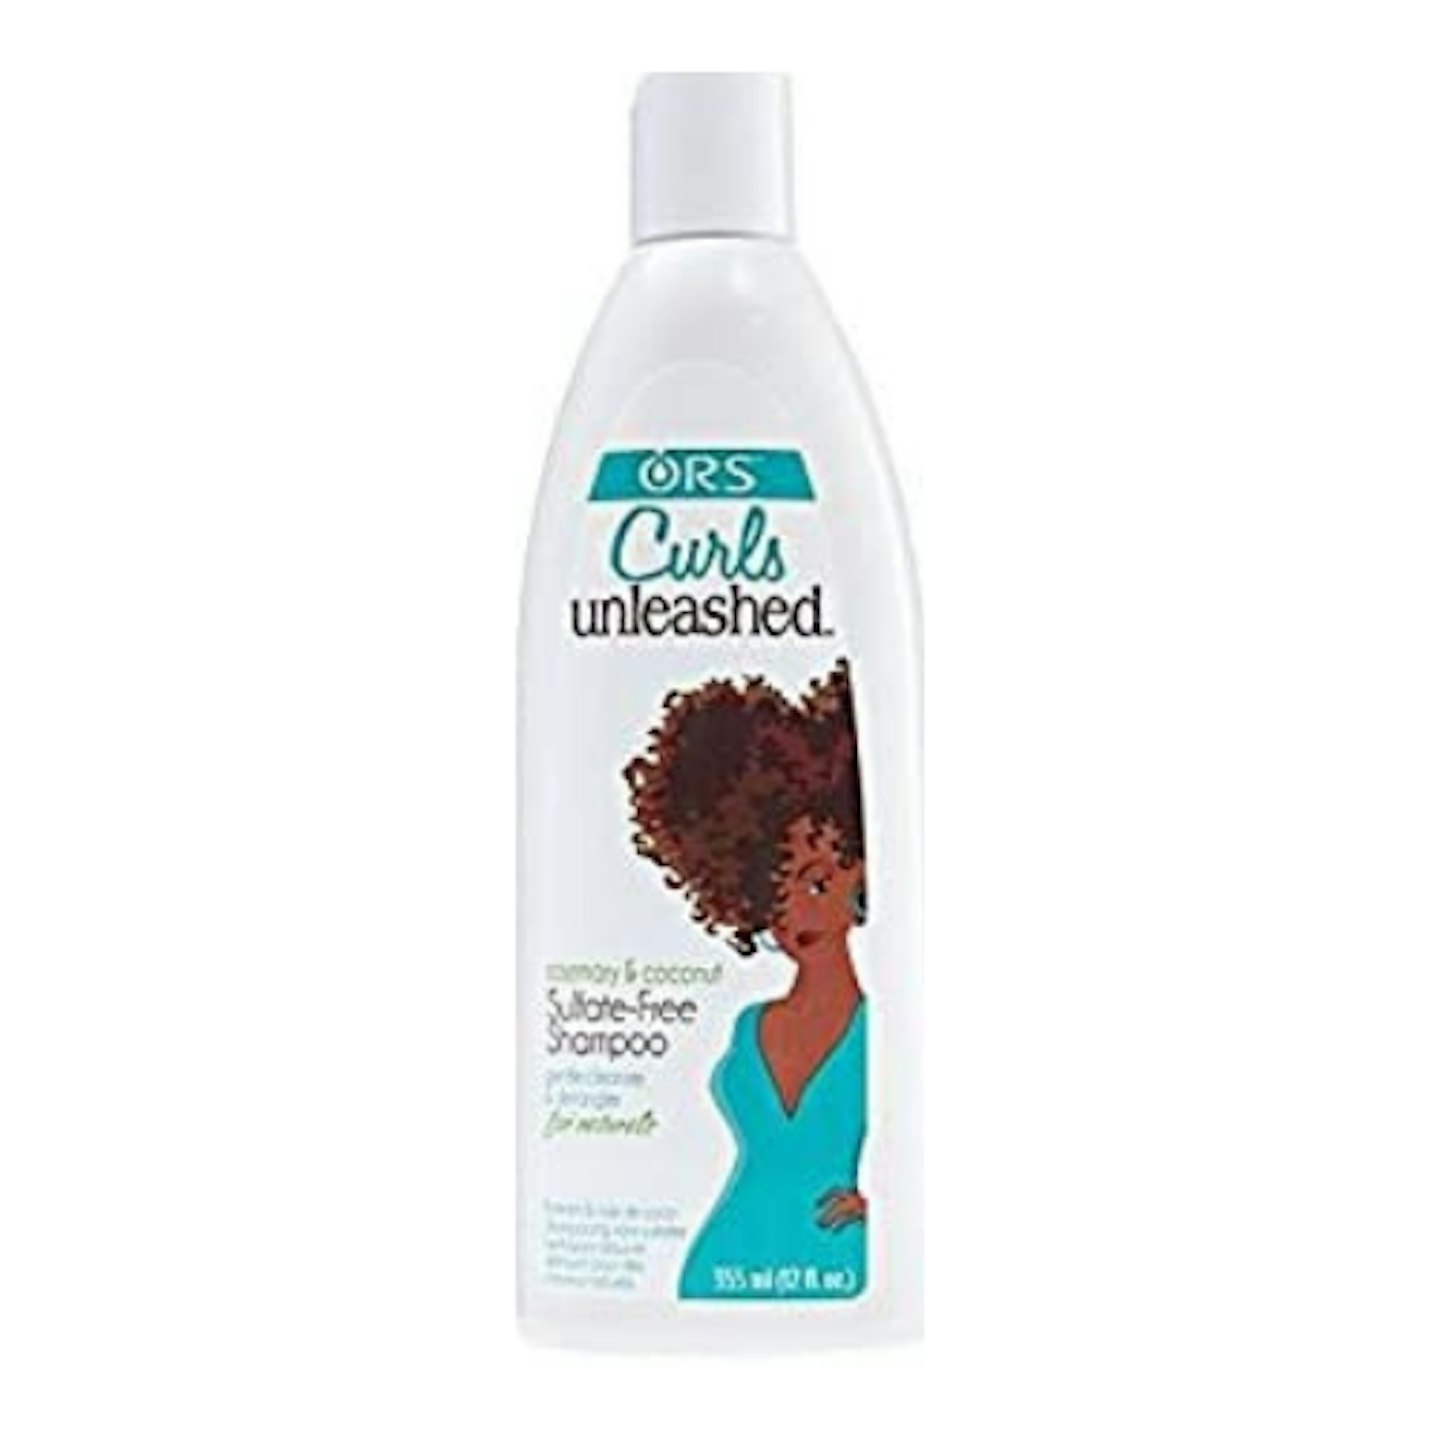 ORS Curls Unleashed Sulfate-Free Shampoo on white background